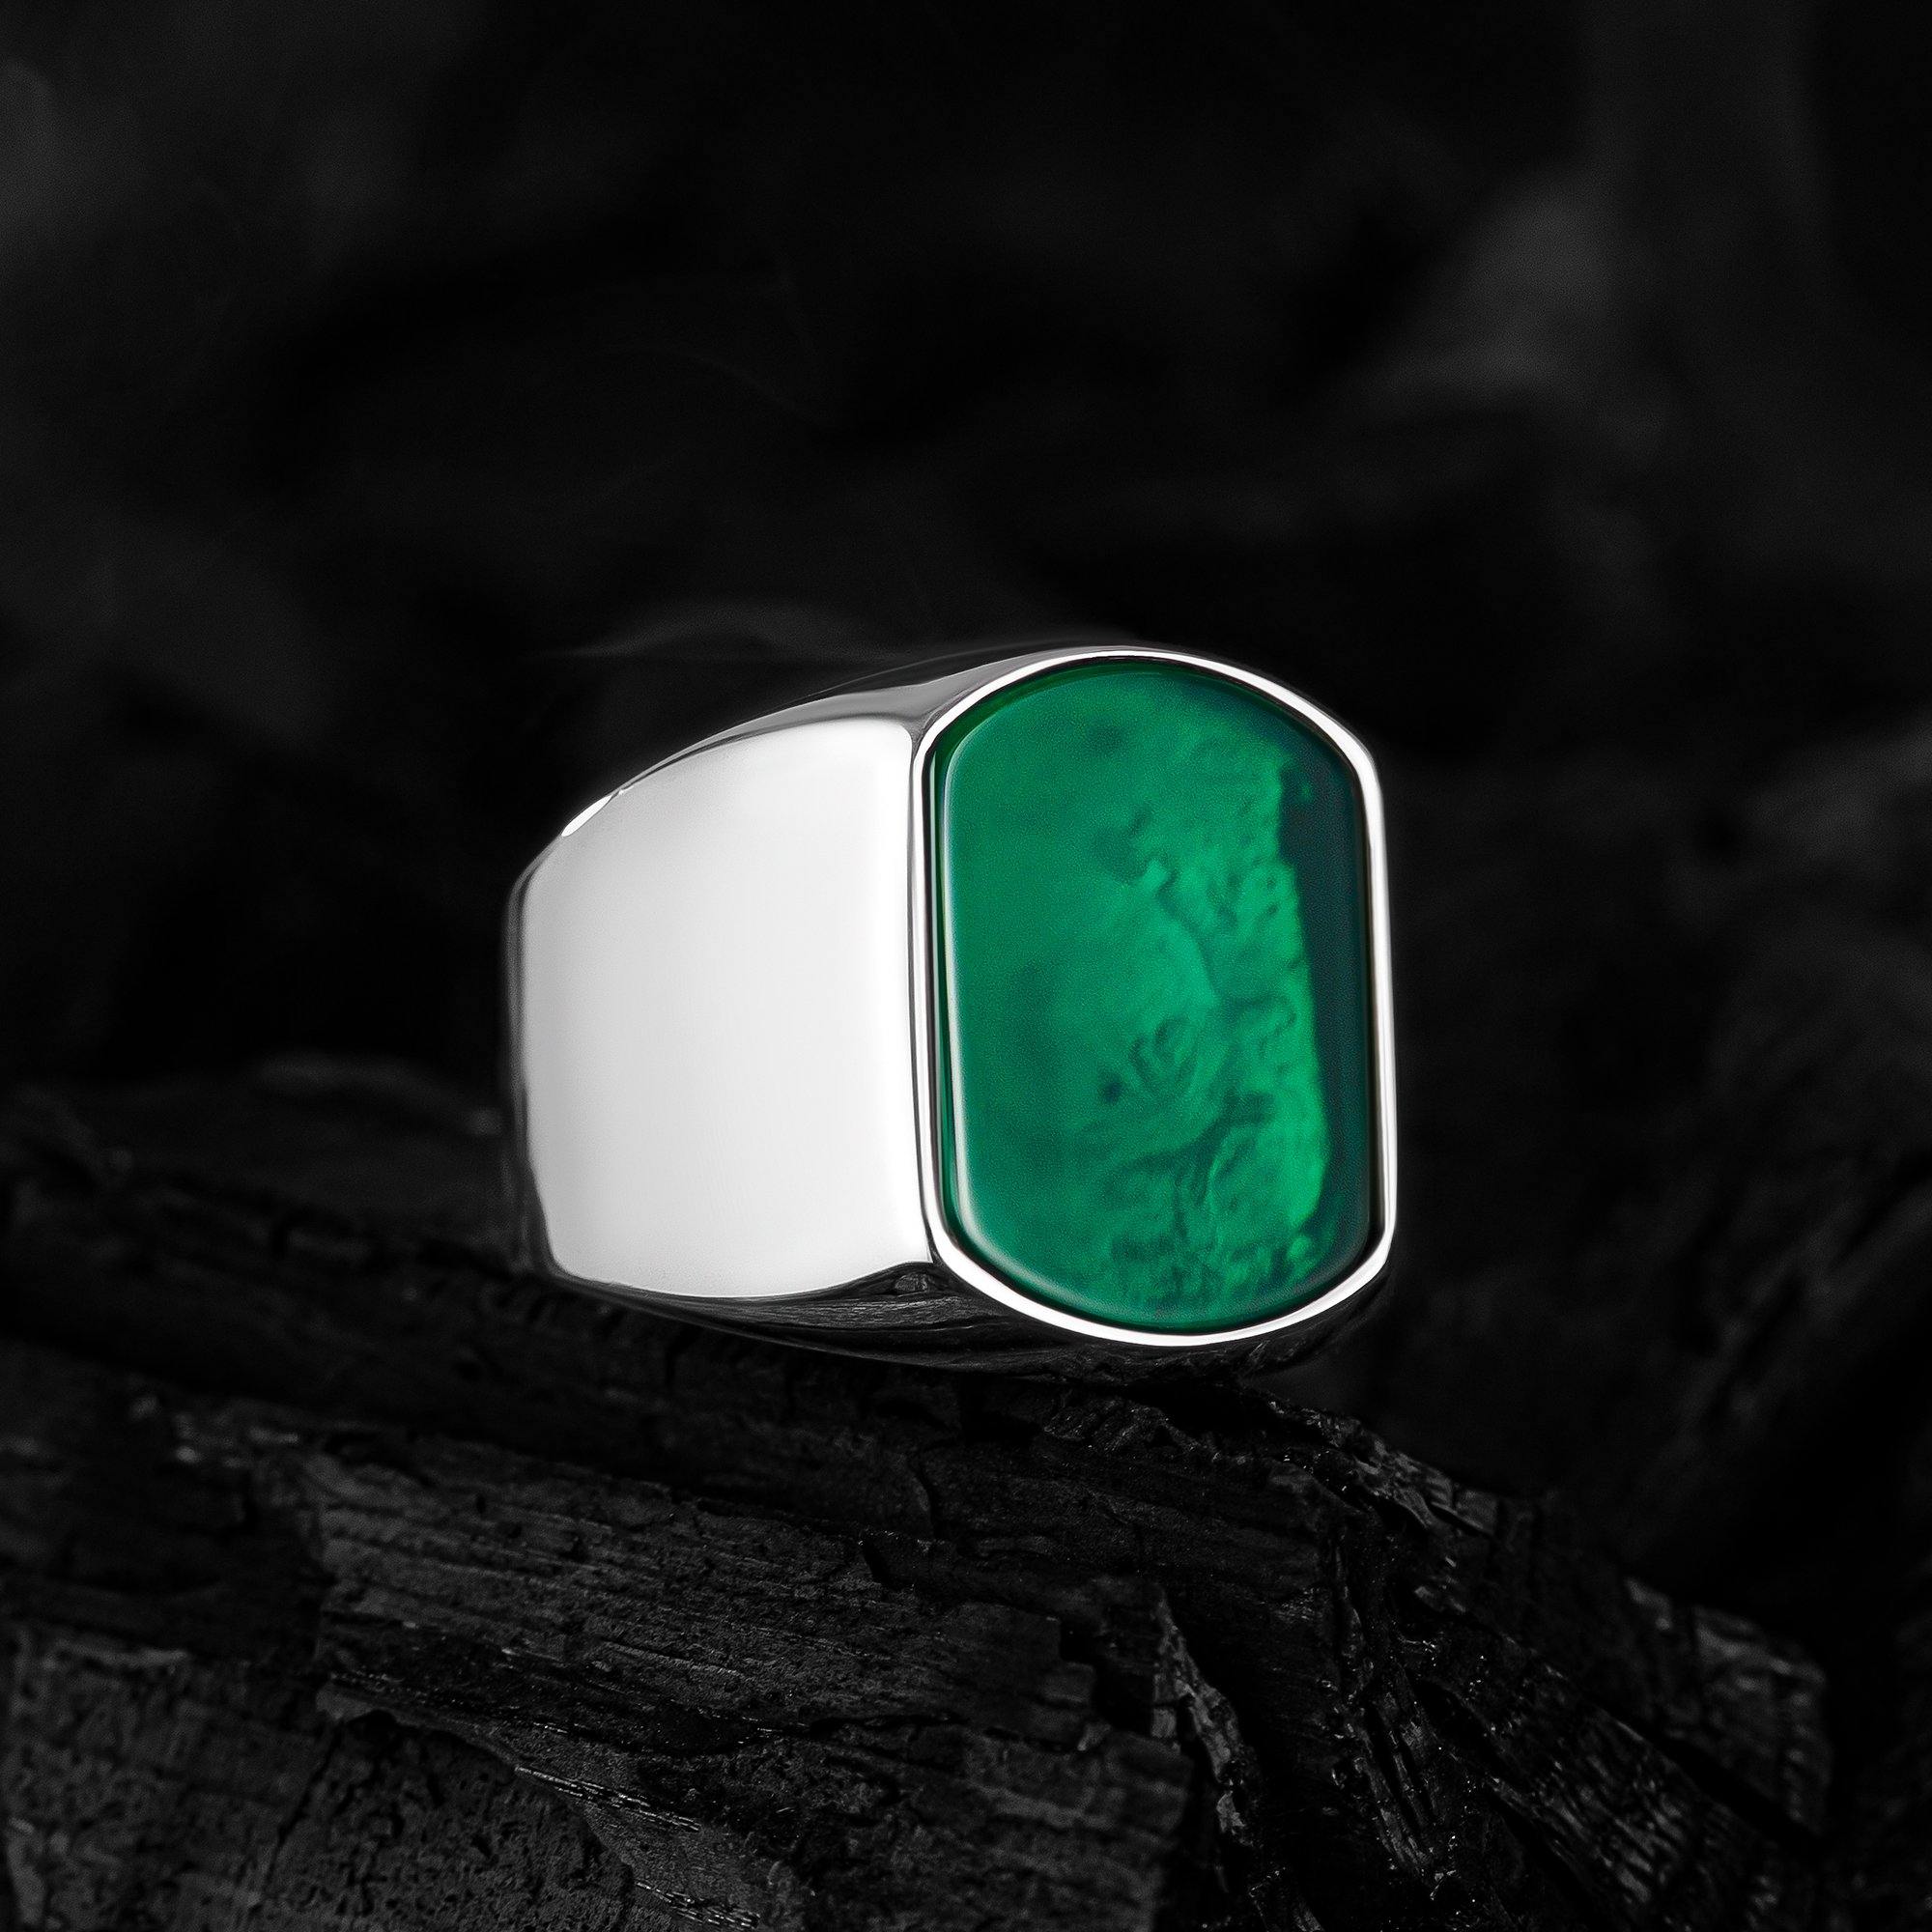 Minimalist Handmade Mens Ring, Green Agate Stone Ring - OXO SILVER